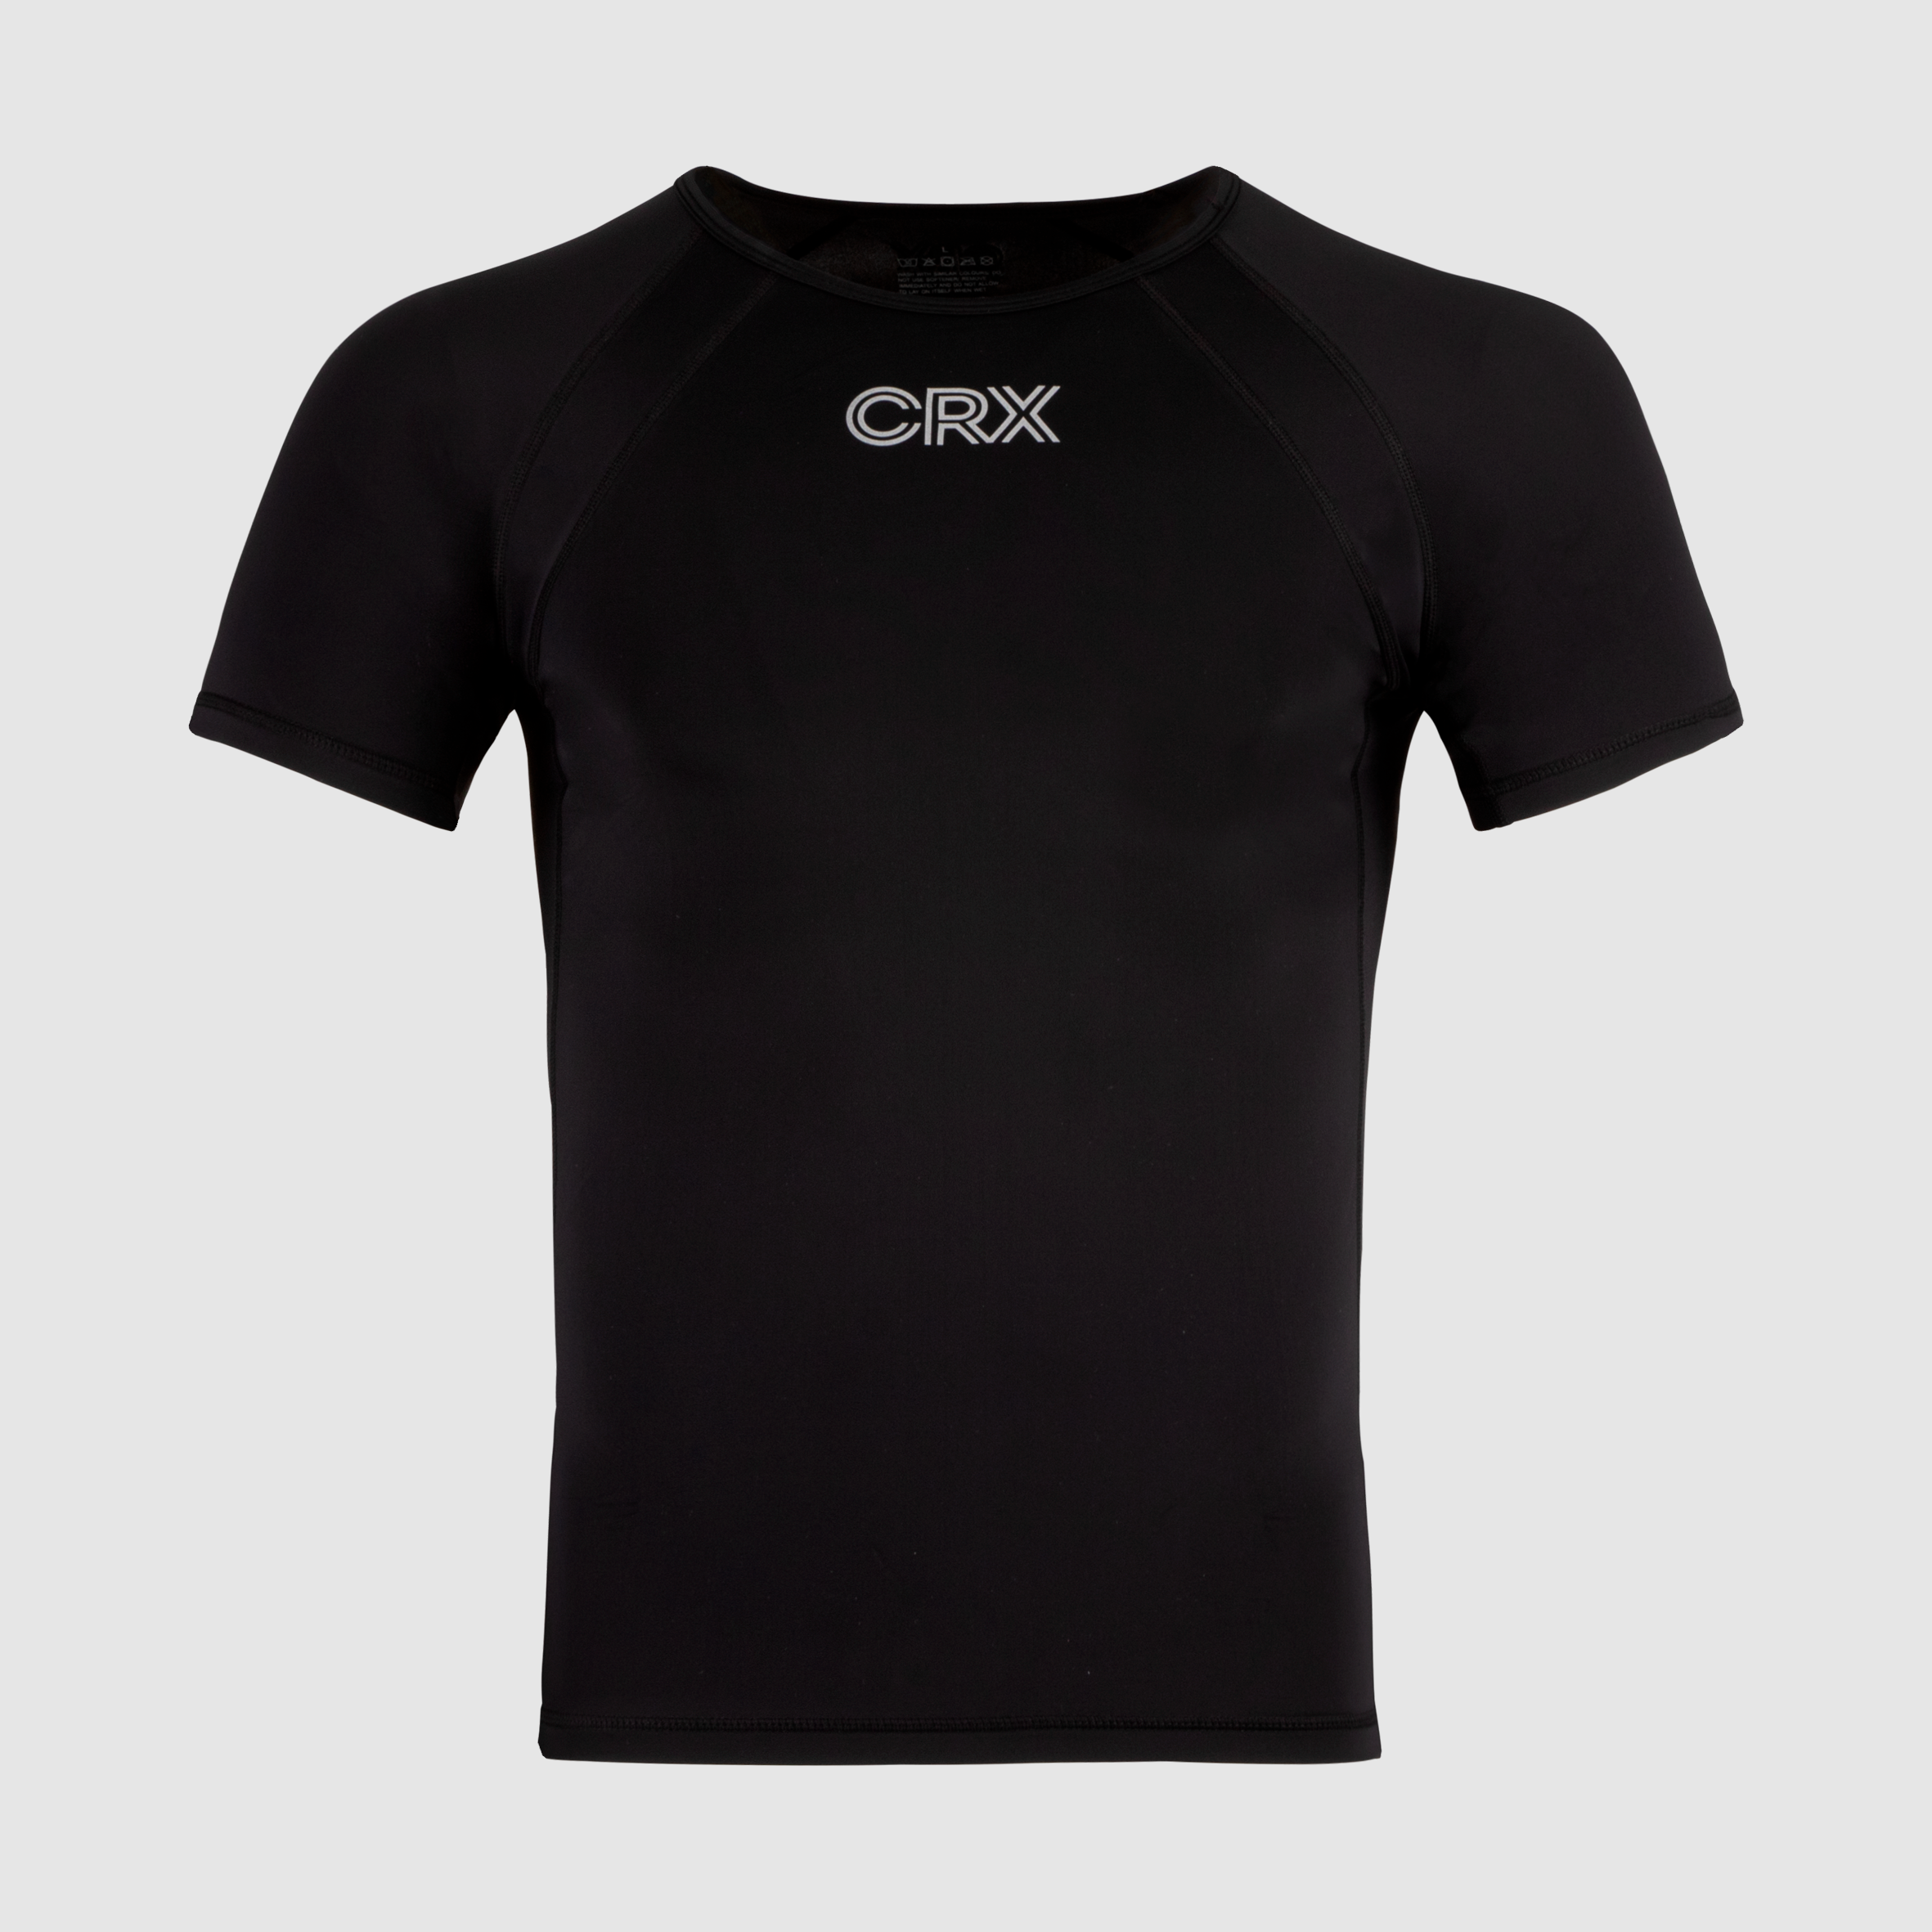 CombatX Summer 3/4 Compression Shirt - Adult Male - SPECIAL DEAL